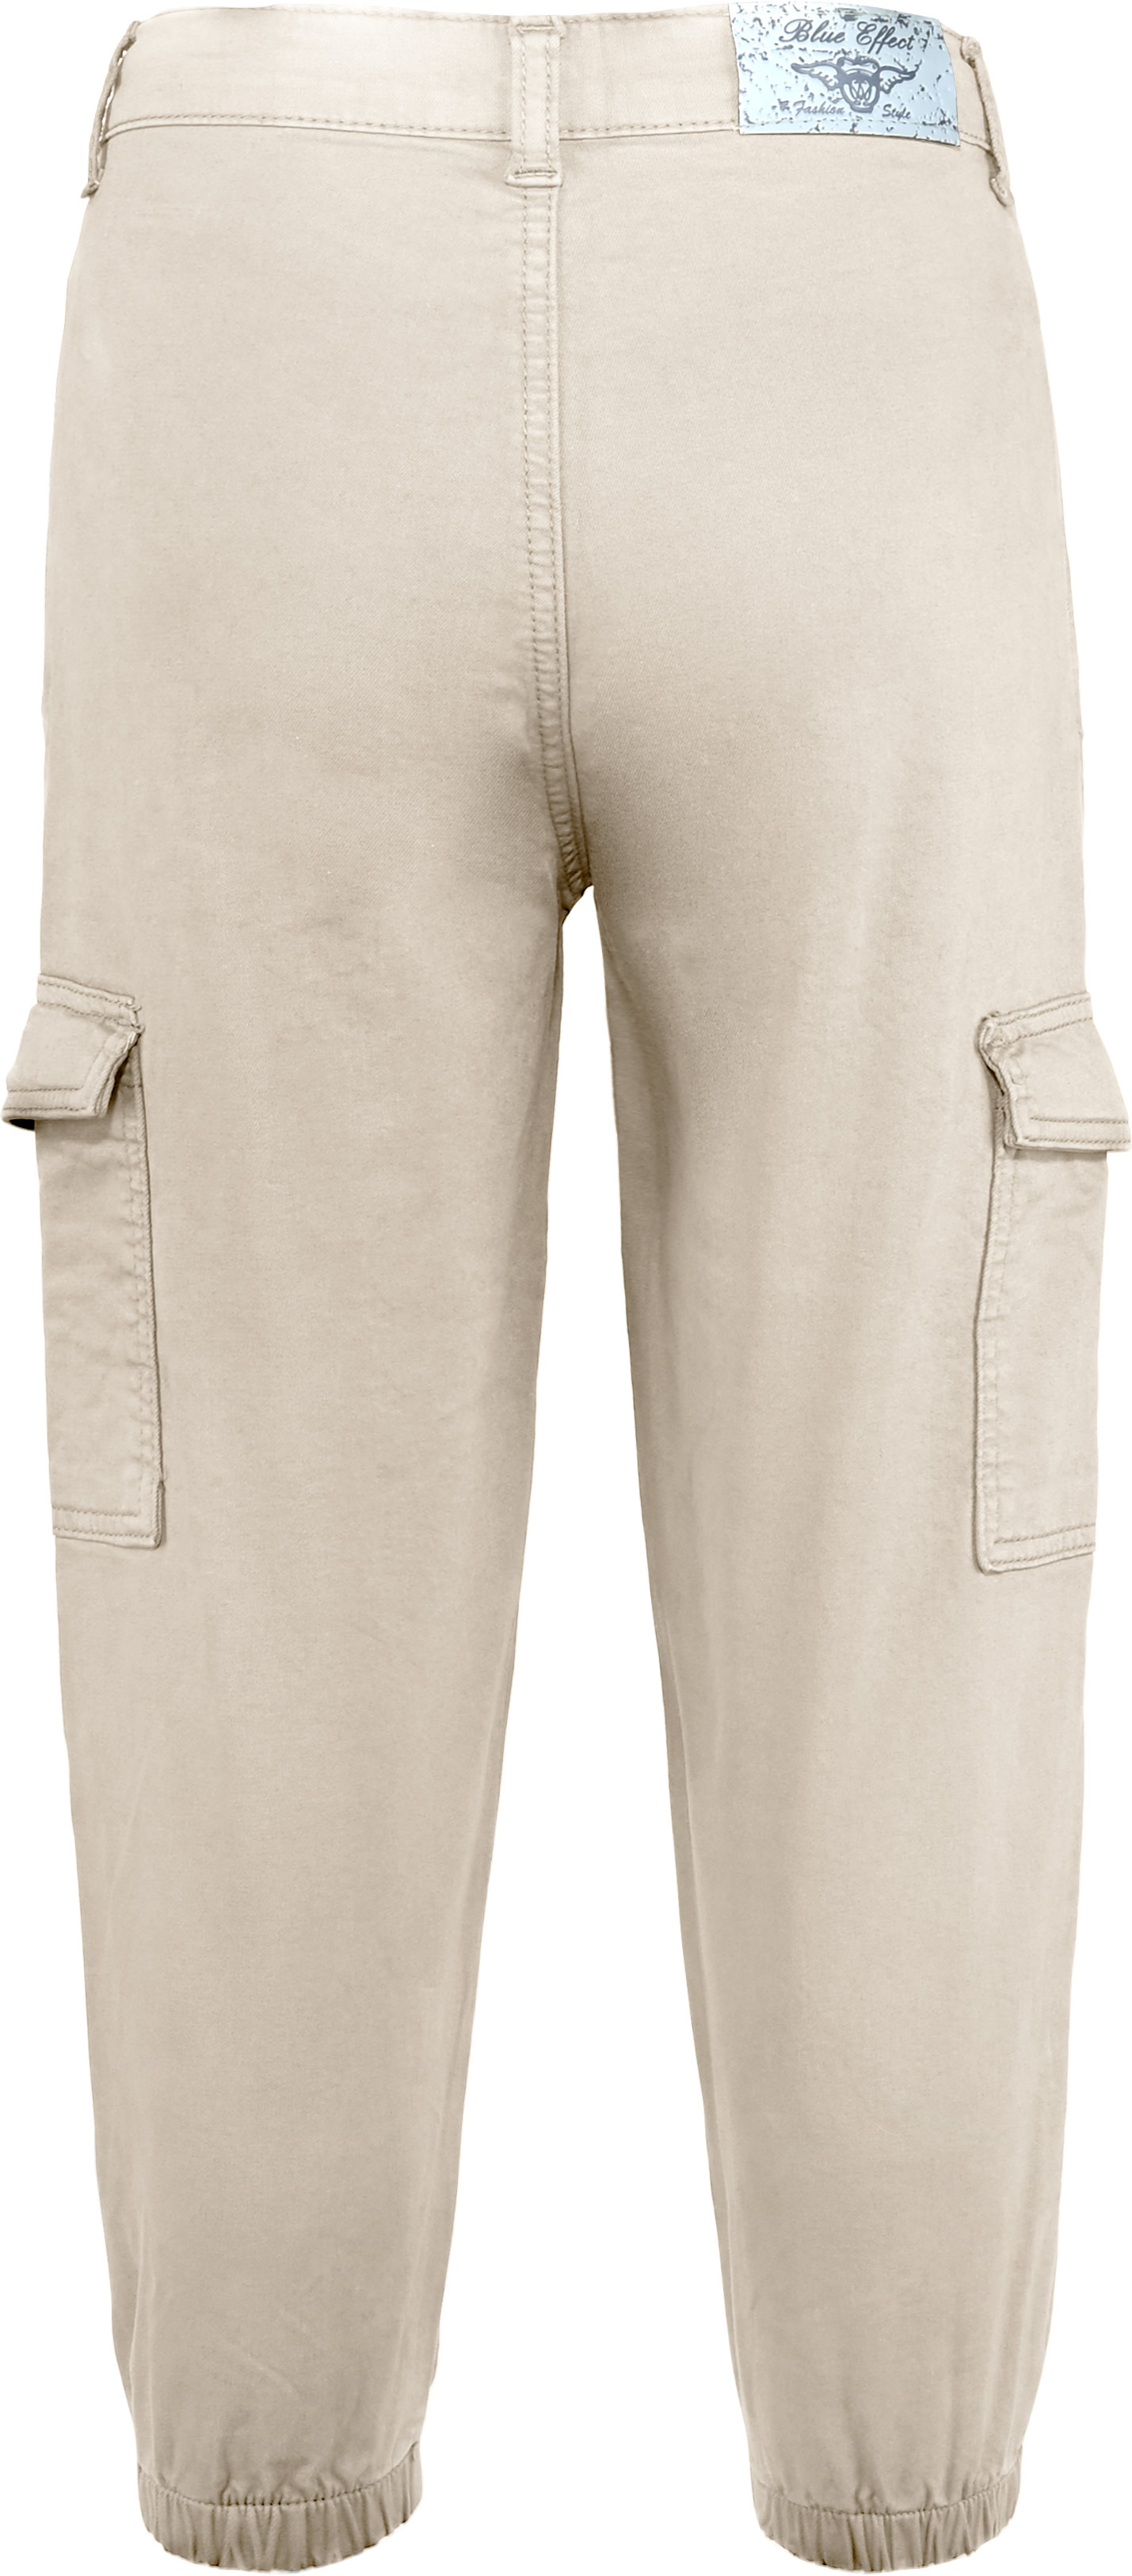 1334-Girls Super Balloon Pant Cargo, Cropped, available in Normal